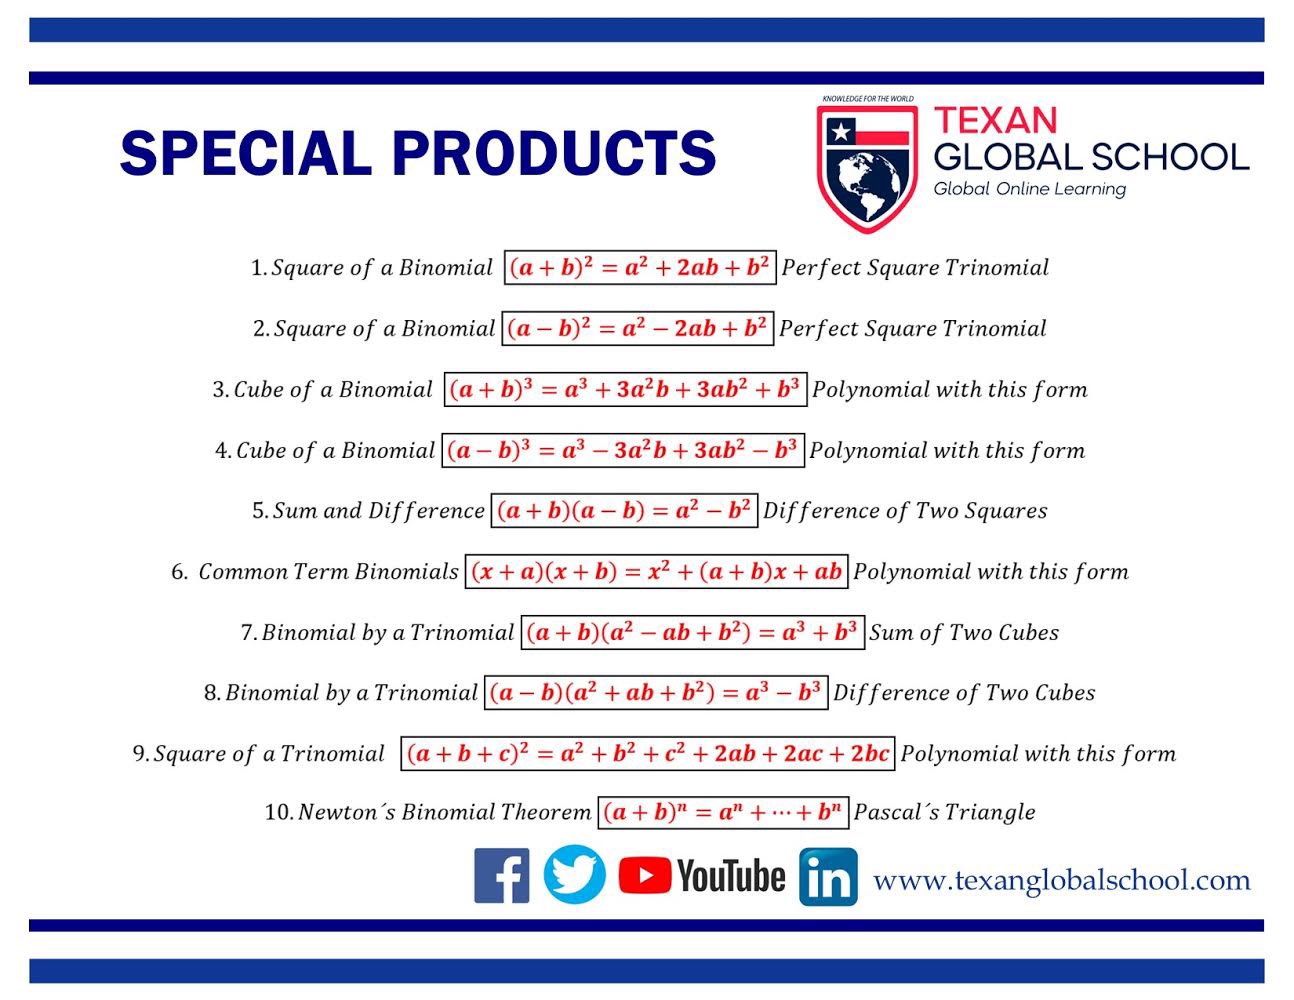 Special Products